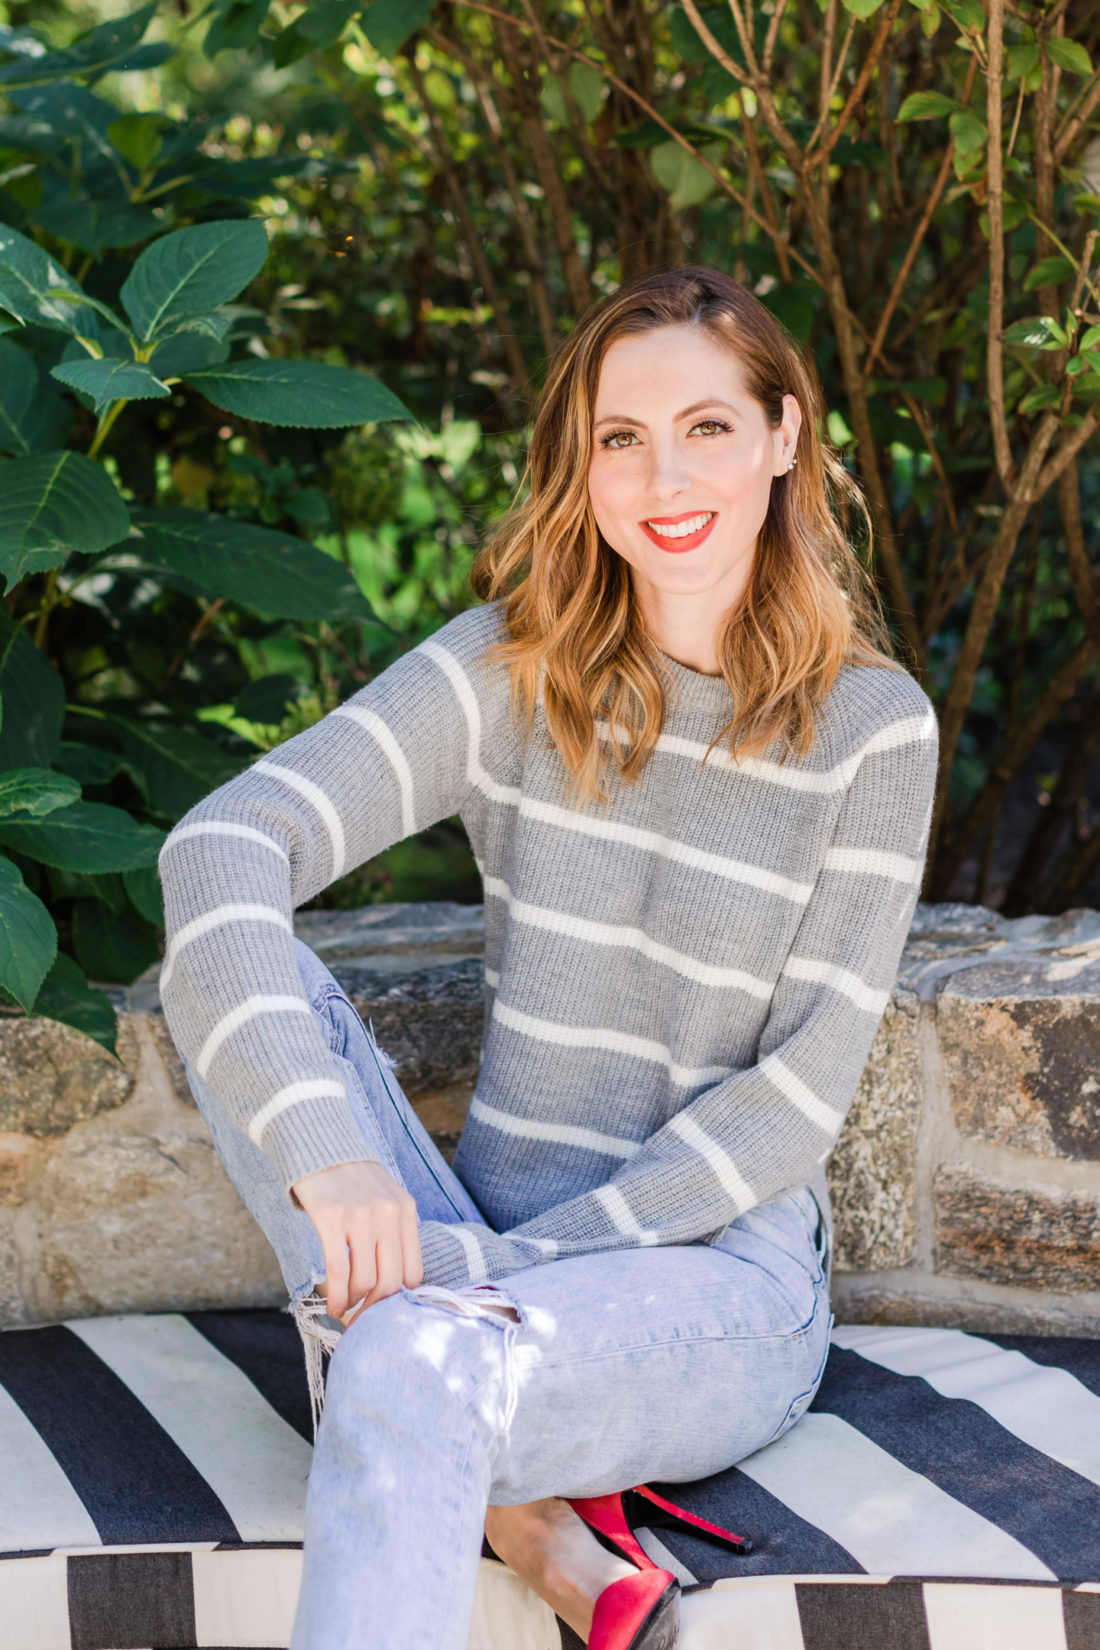 Eva Amurri Martino wears a striped sweater and red heels out by her fire pit in Connecticut